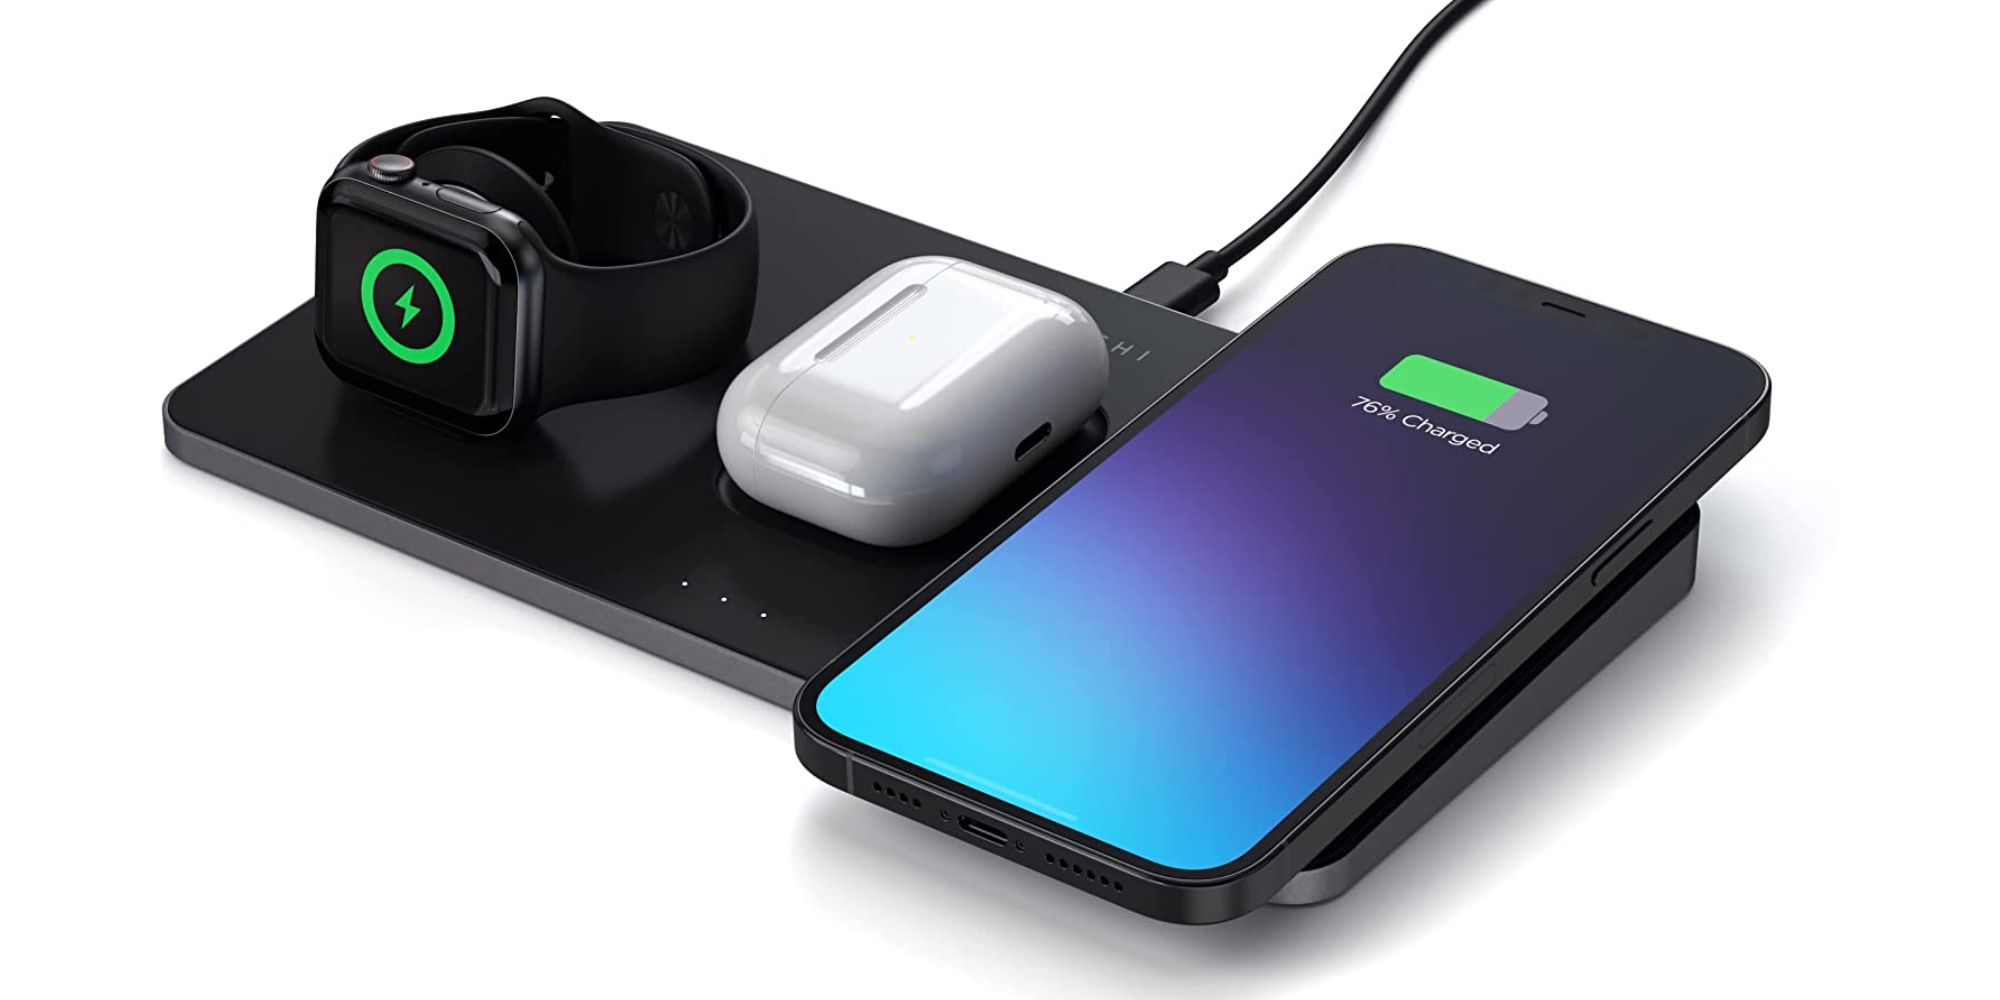 Satechi Trio MagSafe Wireless Charging Pad sees $36 discount to new low ...